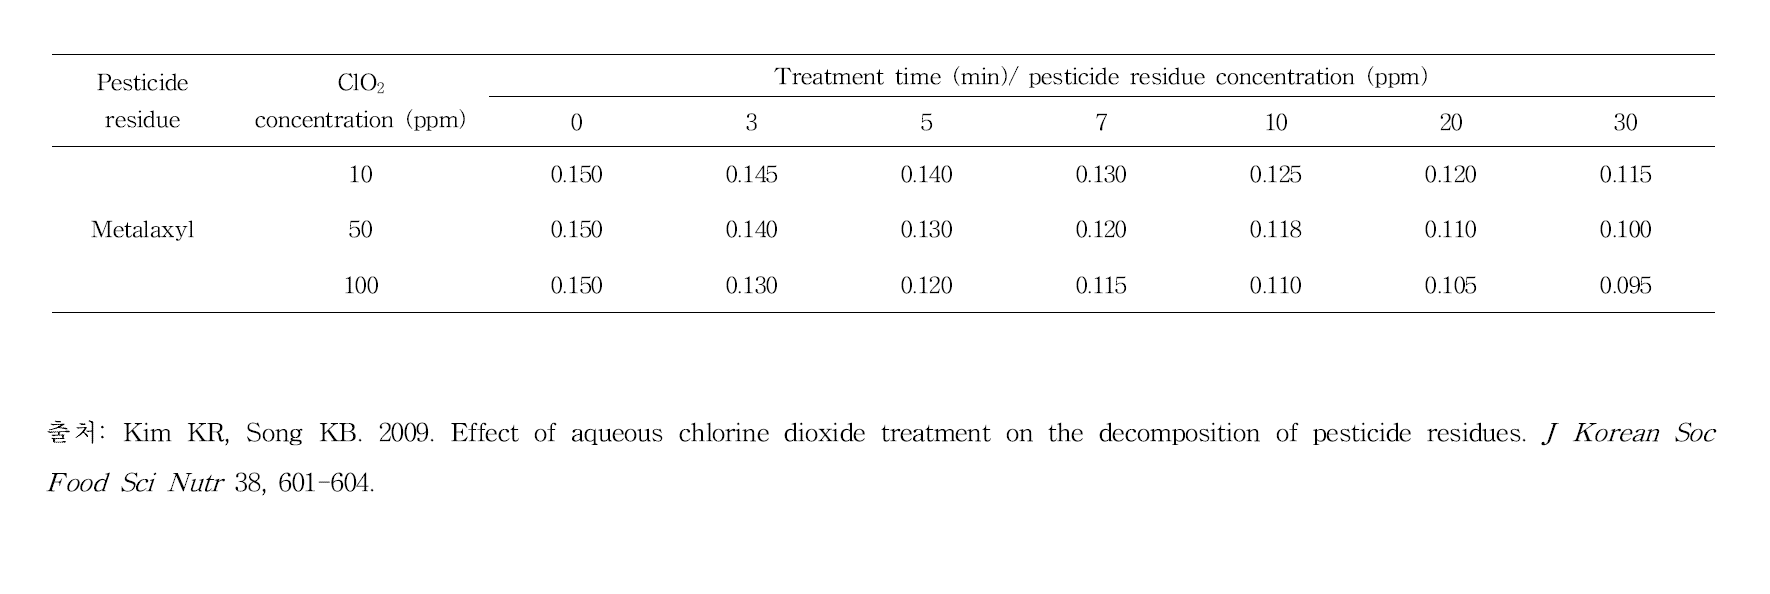 Decomposition of metalaxyl treated with aqueous chlorine dioxide